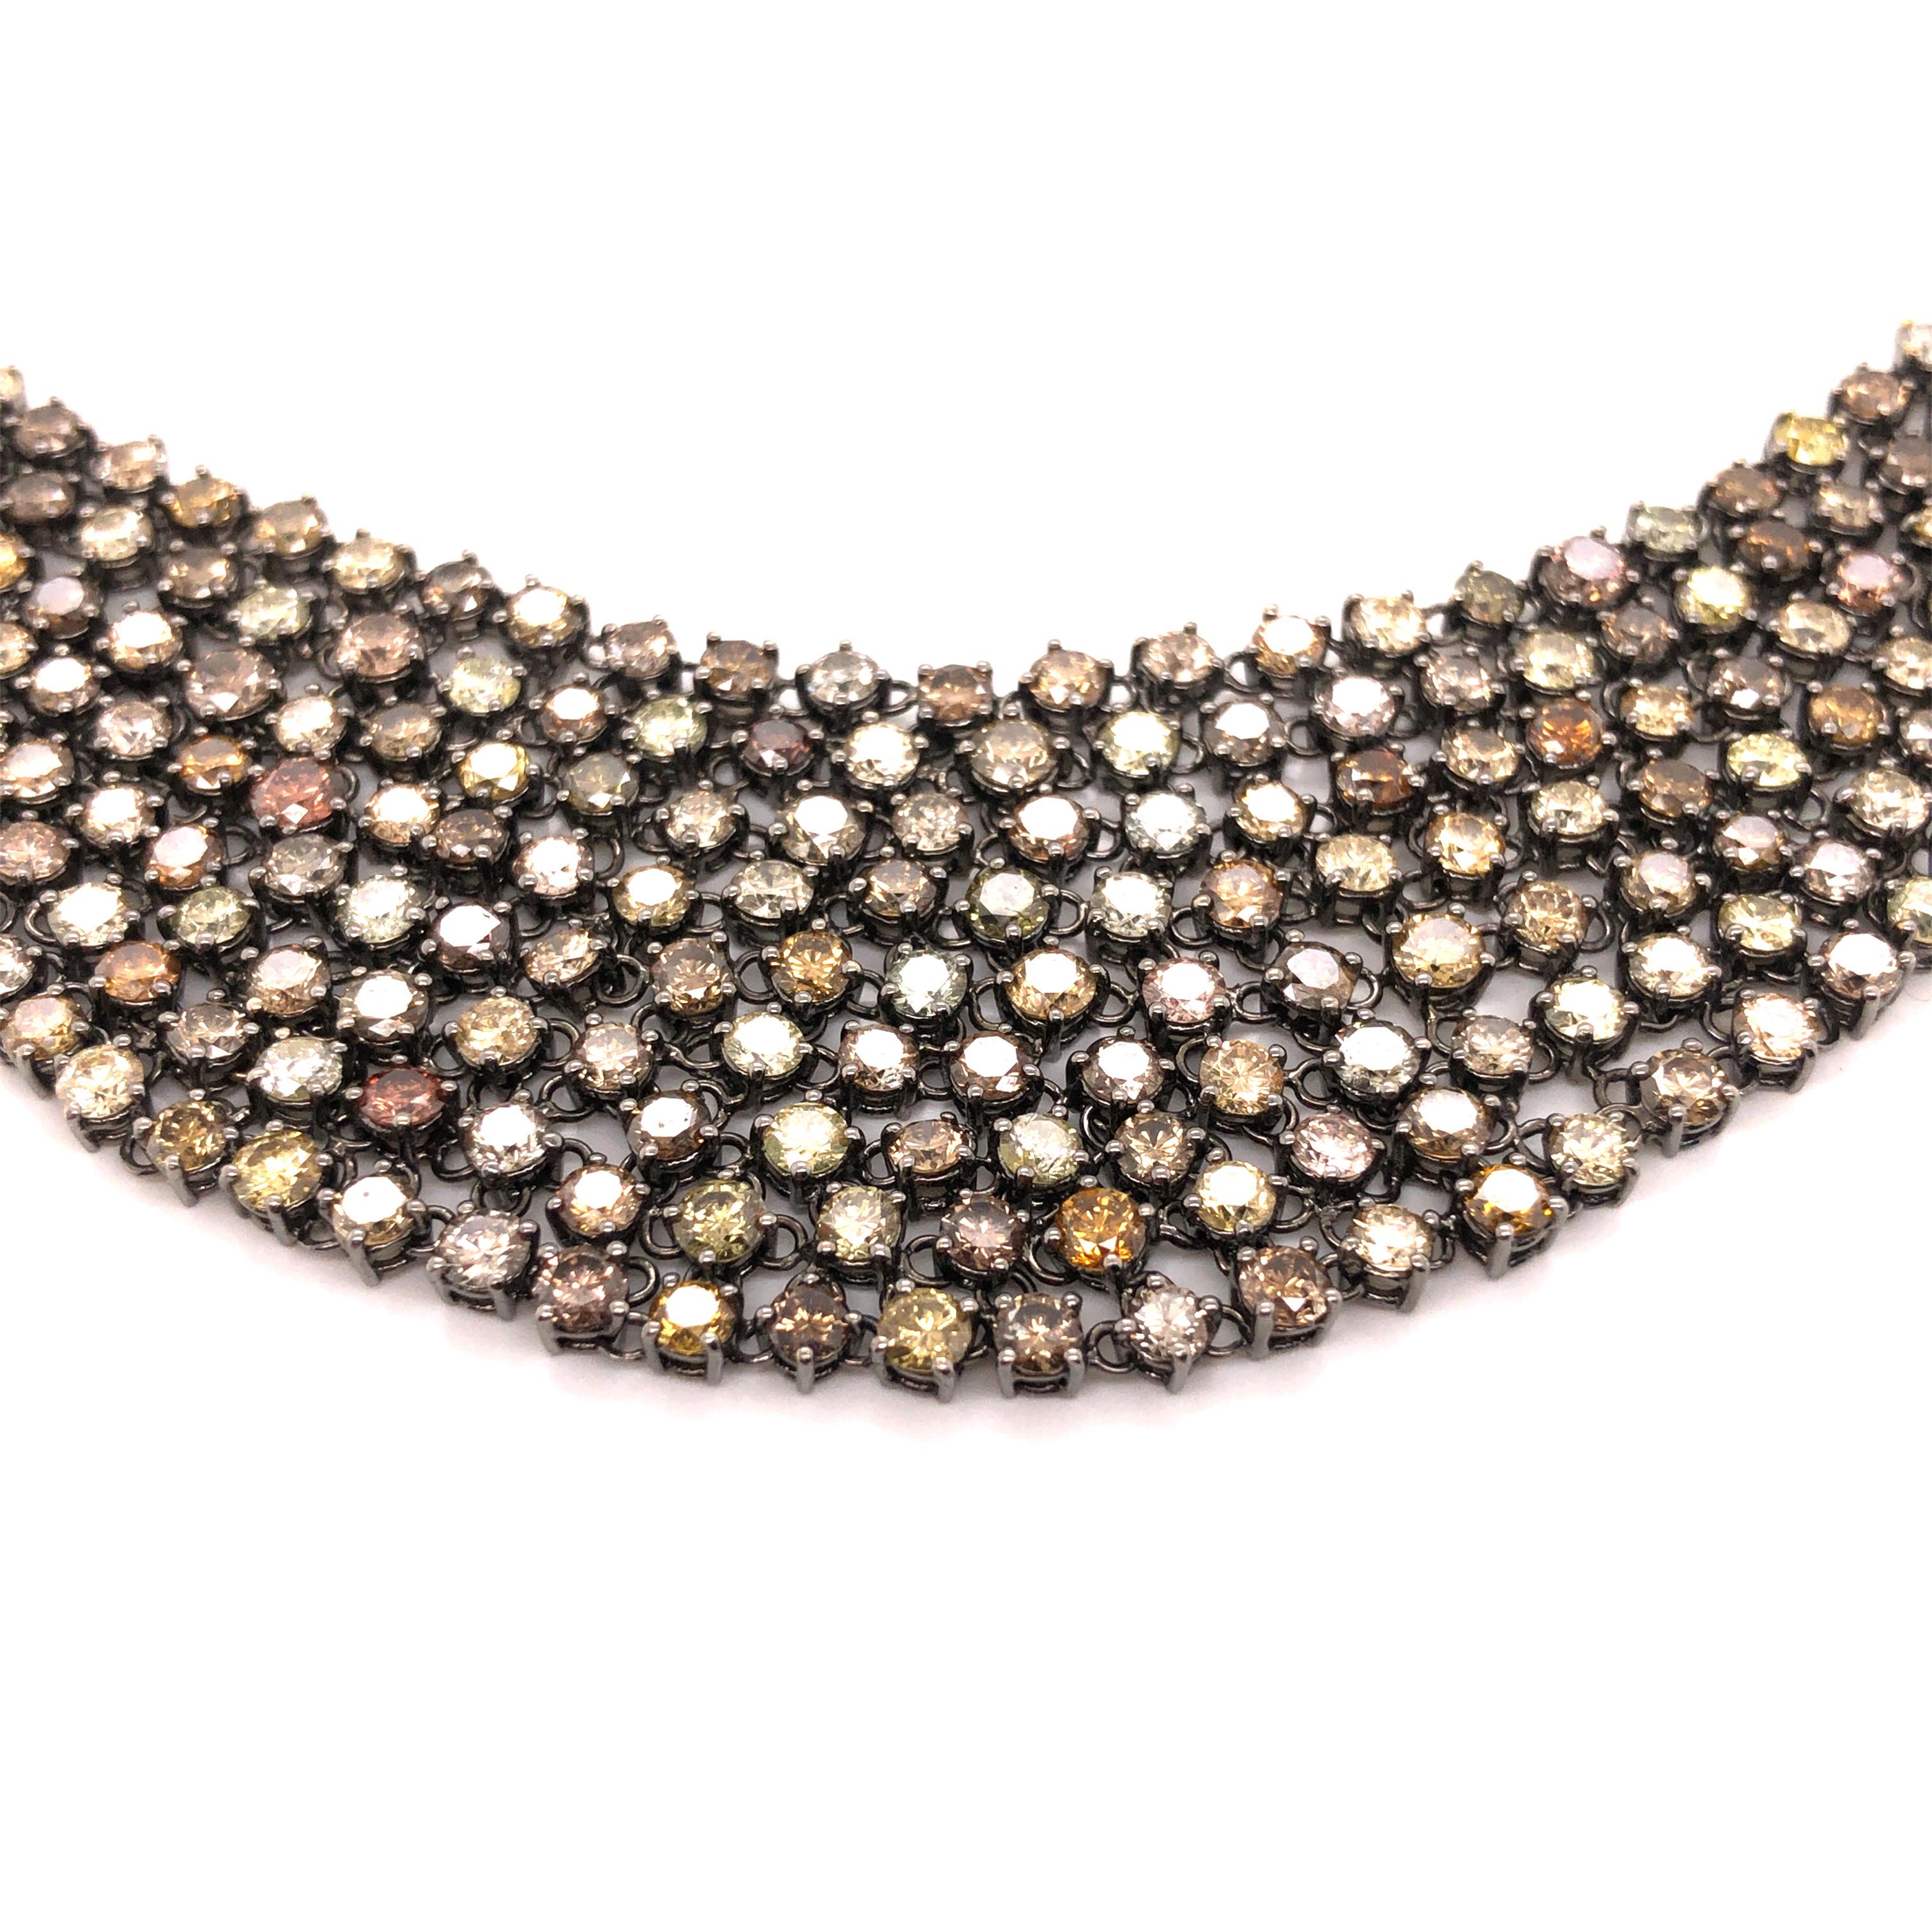 An 18K gold black rhodium necklace featuring a mix of white, brown, yellow, and orange round-cut diamonds weighing a total of 30.69 carats.

Stone: Diamond ~ 30.69

Metal: 18K Gold

Size: 16